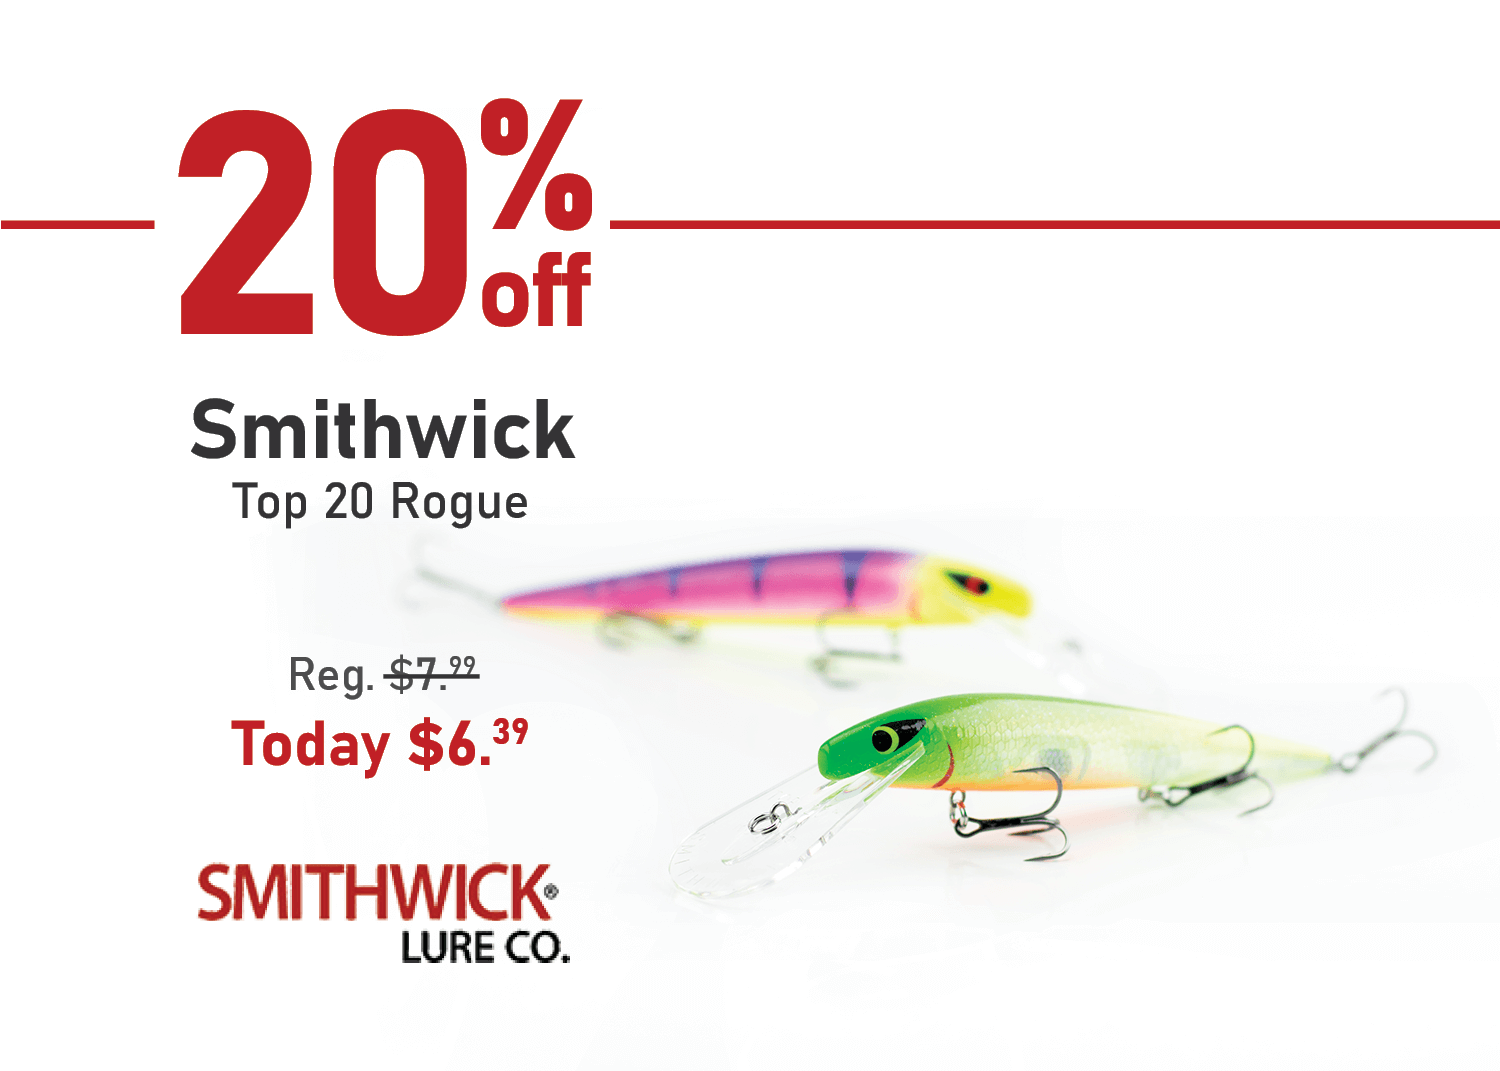 Save 20% on the Smithwick Top 20 Rogue